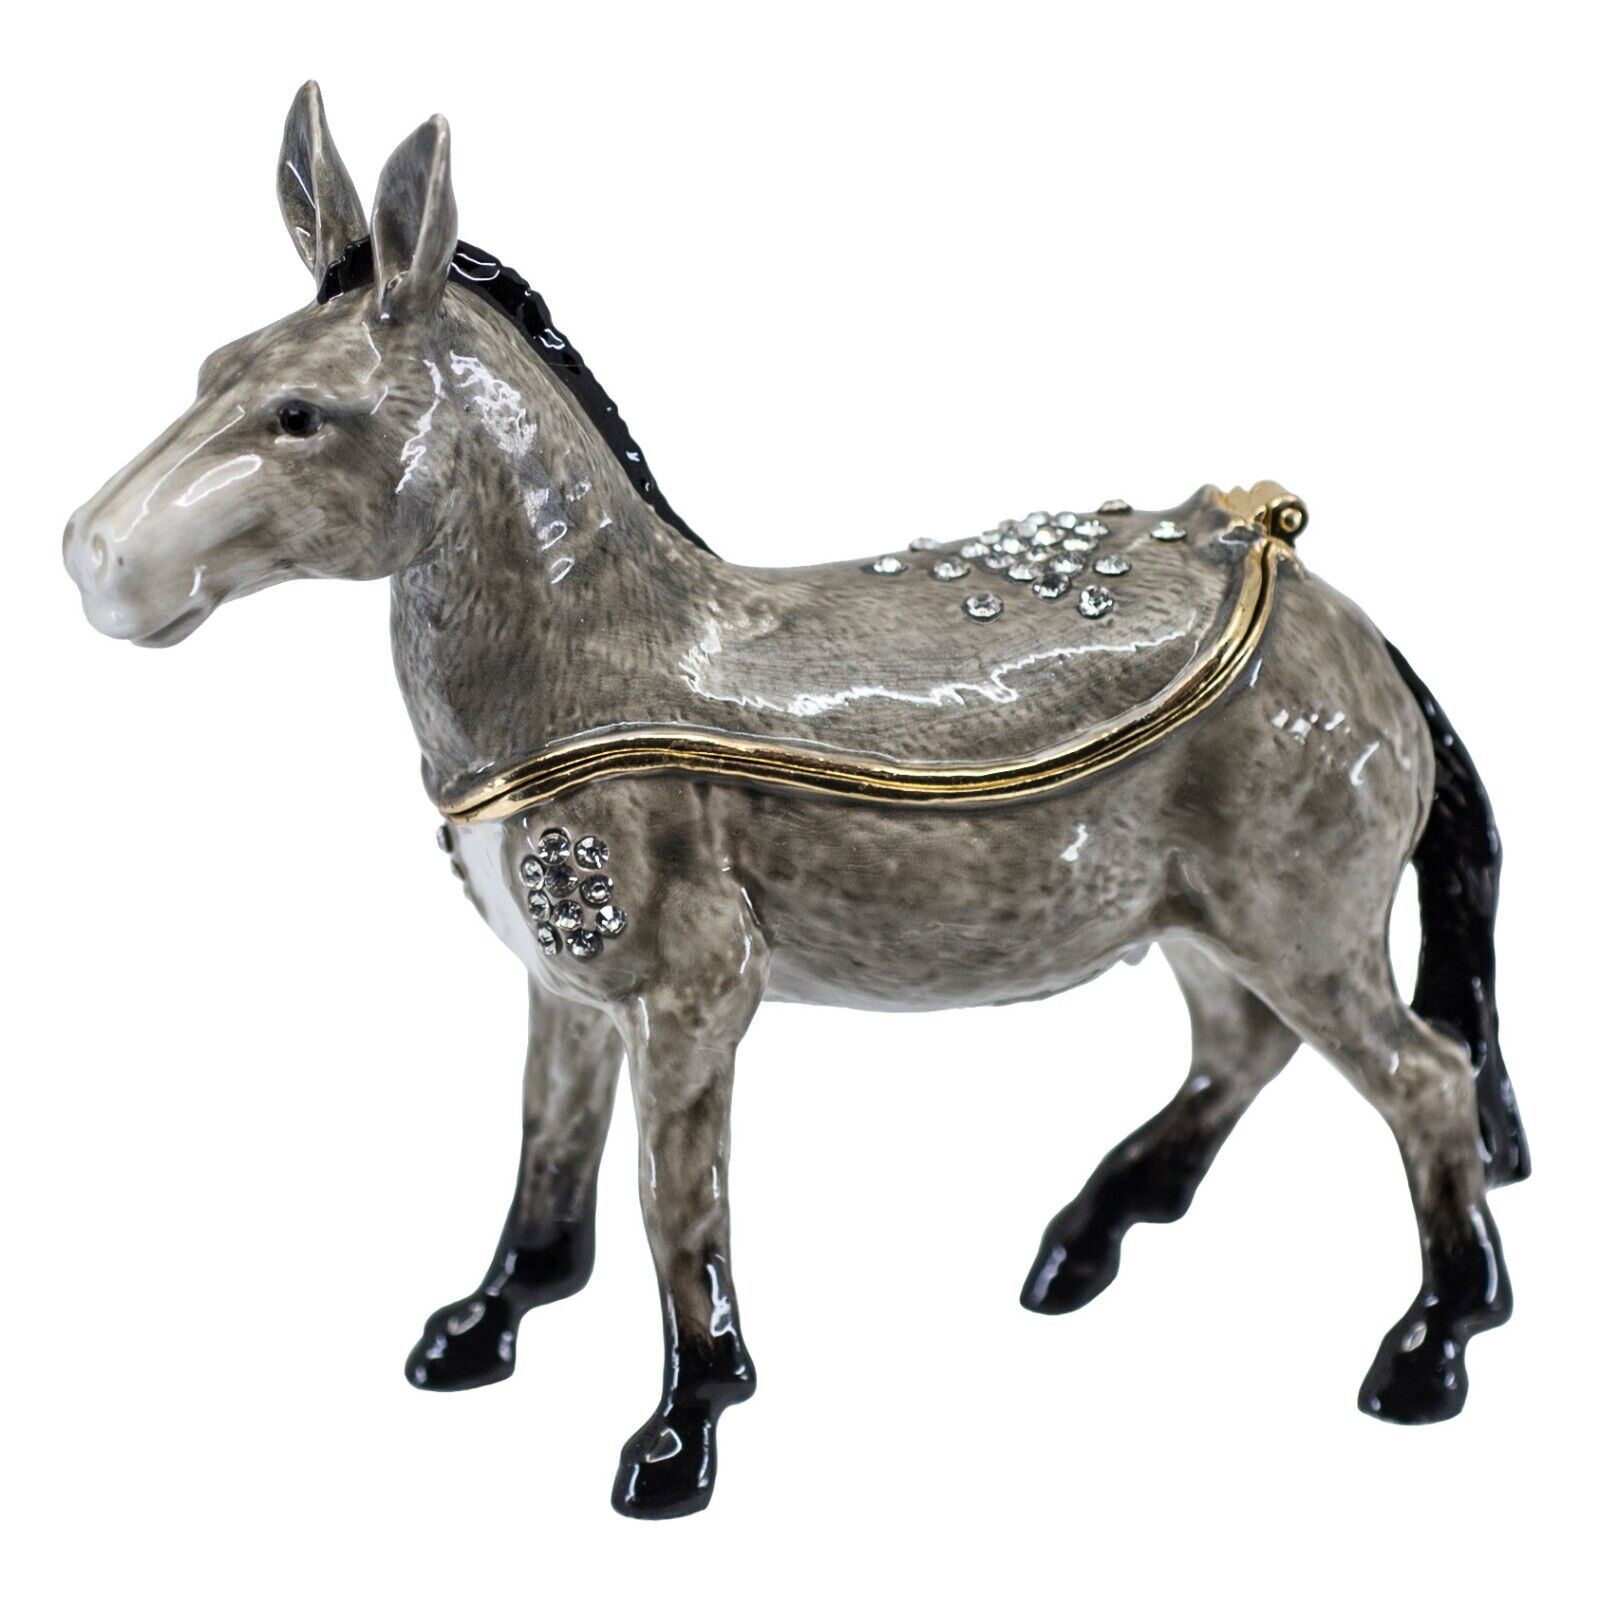 Bejeweled Enameled Pewter Donkey Trinket Jewel Box With Crystals 3.5" High New! Без бренда 3008